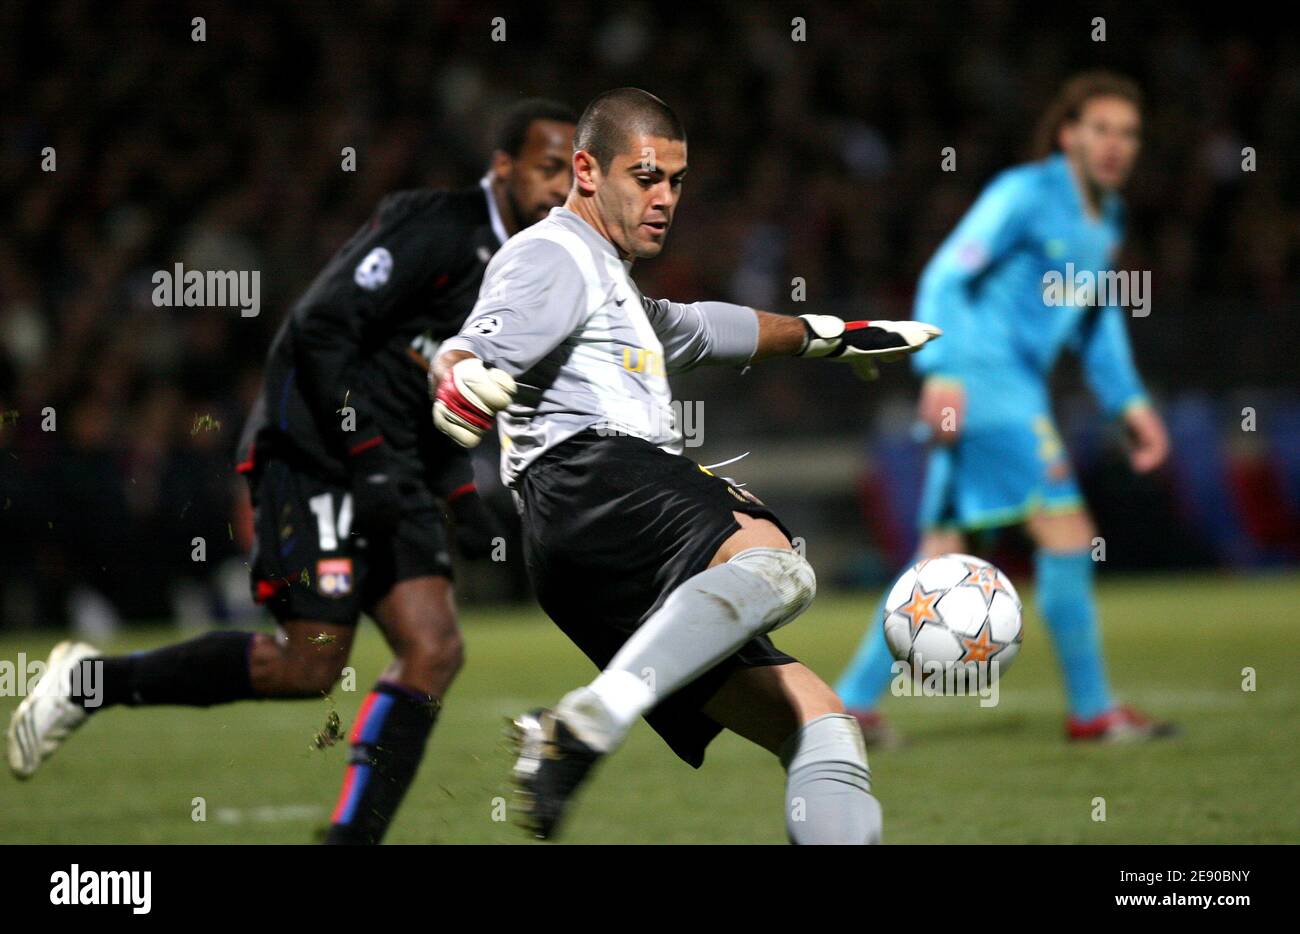 Barcelona's goalkeeper Victor Valdes during the UEFA Champions League, Group E, Olympique Lyonnais vs FC Barcelona at the 'Stade de Gerland' in Lyon, France, on November 27, 2007. The match ended in a draw 2-2. Photo by Gouhier-Taamallah/Cameleon/ABACAPRESS.COM Stock Photo